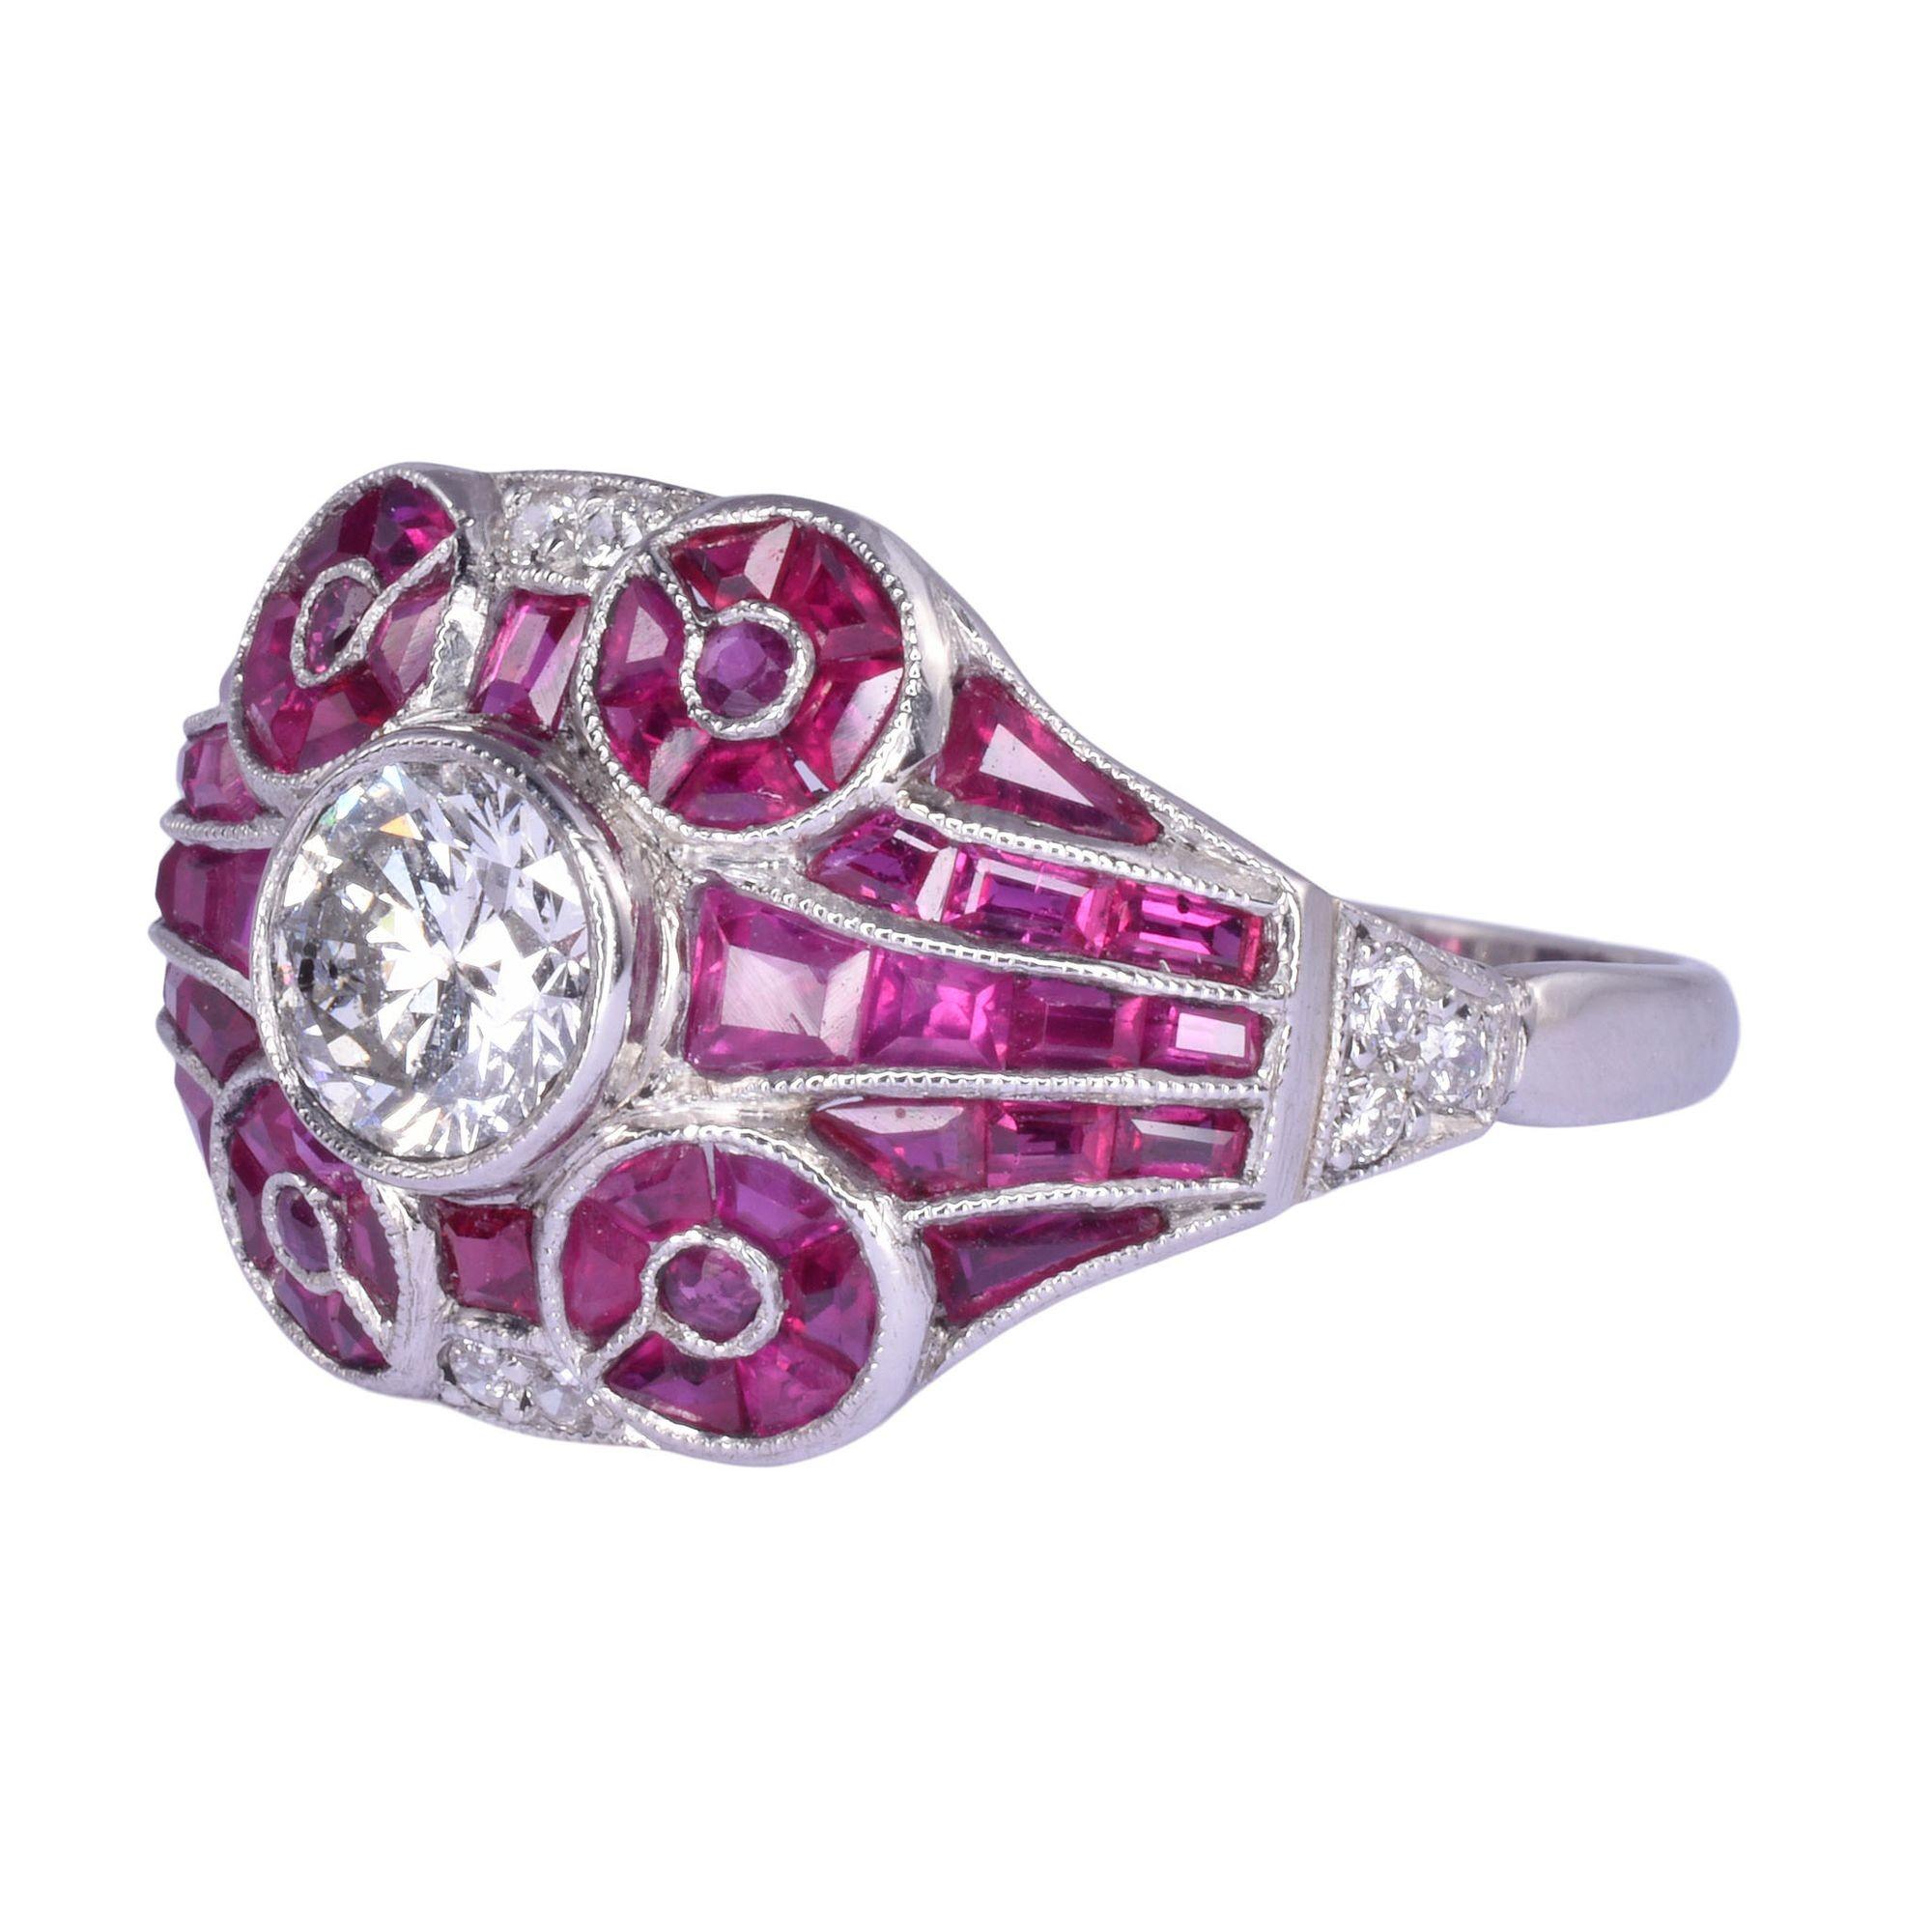 Vintage French platinum diamond ruby ring, circa 1940. This vintage French ring is handmade in platinum featuring a .50 carat round brilliant cut center diamond with SI2 clarity and K color. It is accented with 54 rubies at 1.30 carat total weight.